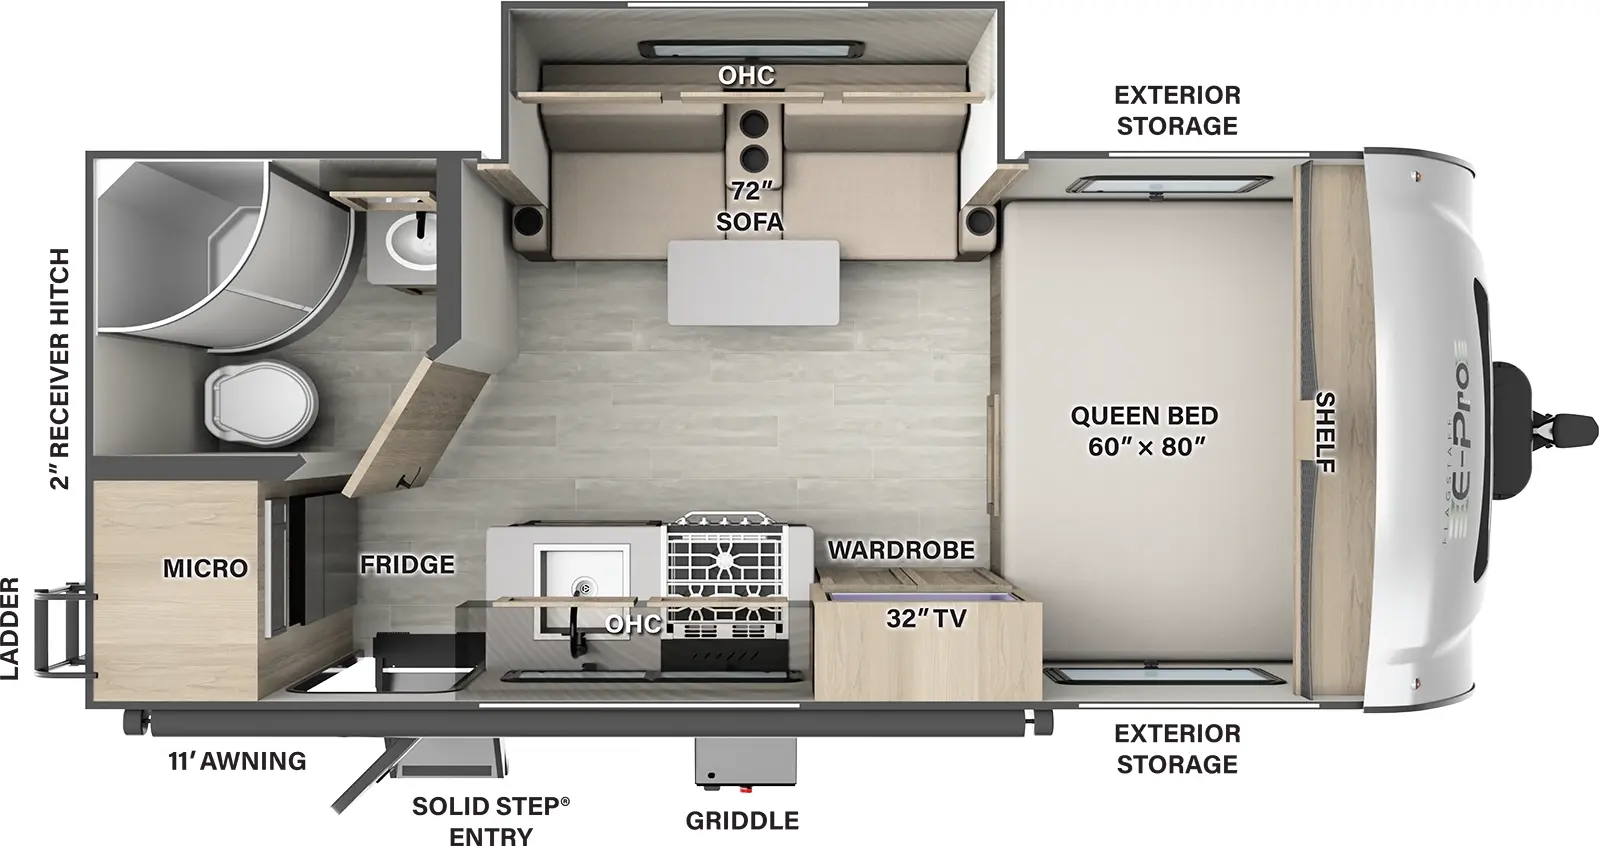 The E19FBS has one slide out and 1 entry. Exterior features storage, rear ladder, 2 inch receiver hitch, griddle, solid step entry, and 11 foot awning. Interior layout front to back: side-facing queen bed with shelf above; off-door side slide out with sofa, table, and overhead cabinet; door side wardrobe with TV, kitchen countertop with cooktop, sink, overhead cabinet, and entry;  rear door side refrigerator and microwave; rear off-door side full bathroom.